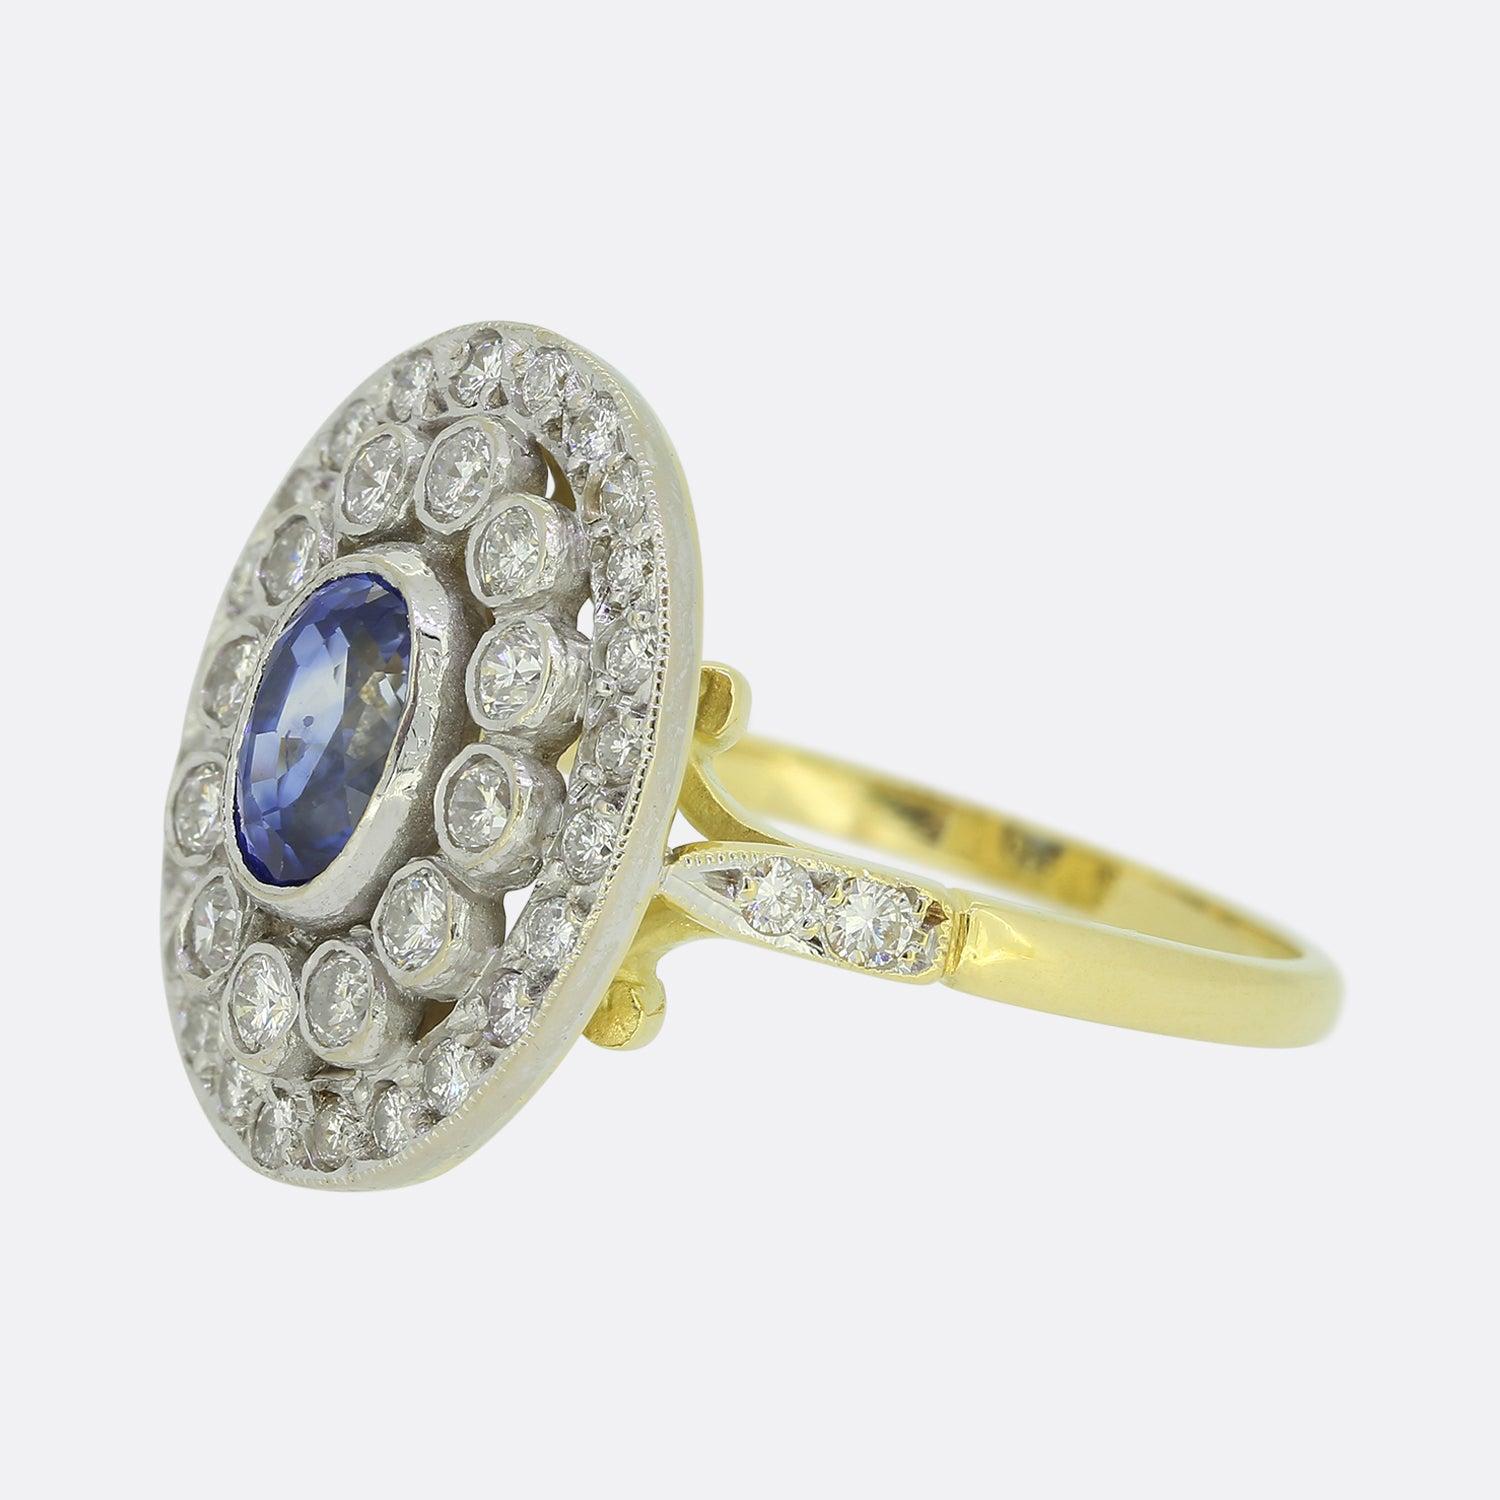 Here we have a stunning sapphire and diamond cluster ring. An open multi-layered structure plays host an oval shaped sapphire at the centre which possesses a strong vivid blue colour tone. This focal stone is then surrounded by two circulating rows